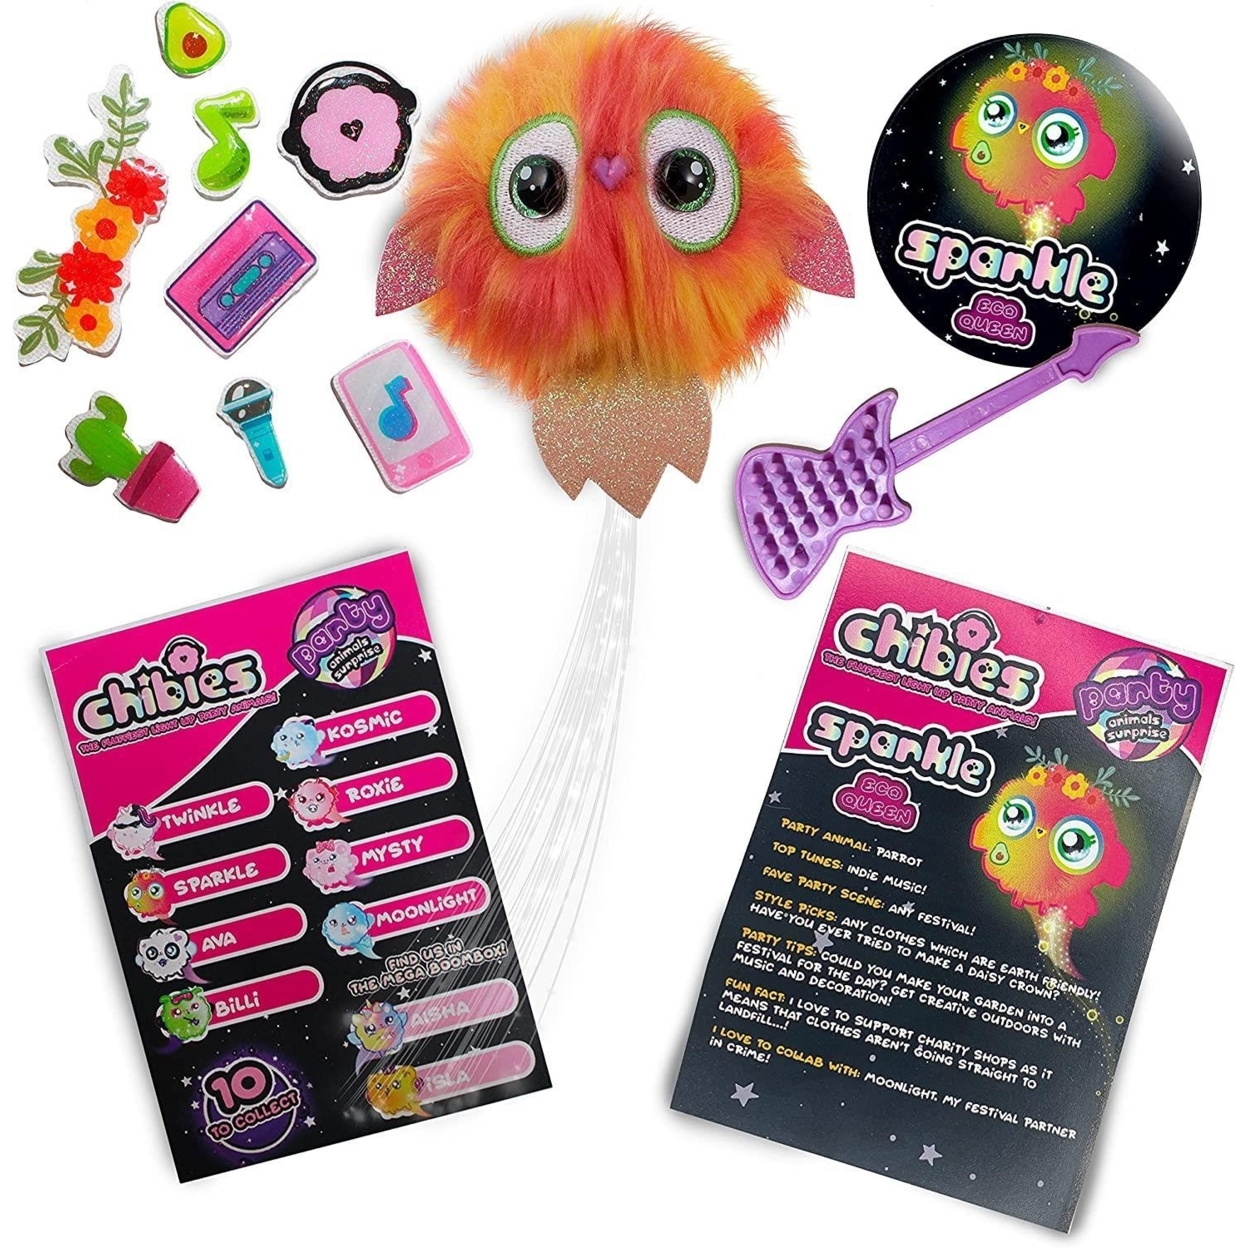 Chibies Boom Box Sparkle Parrot Interactive With Music Glows Lights WOW! Stuff